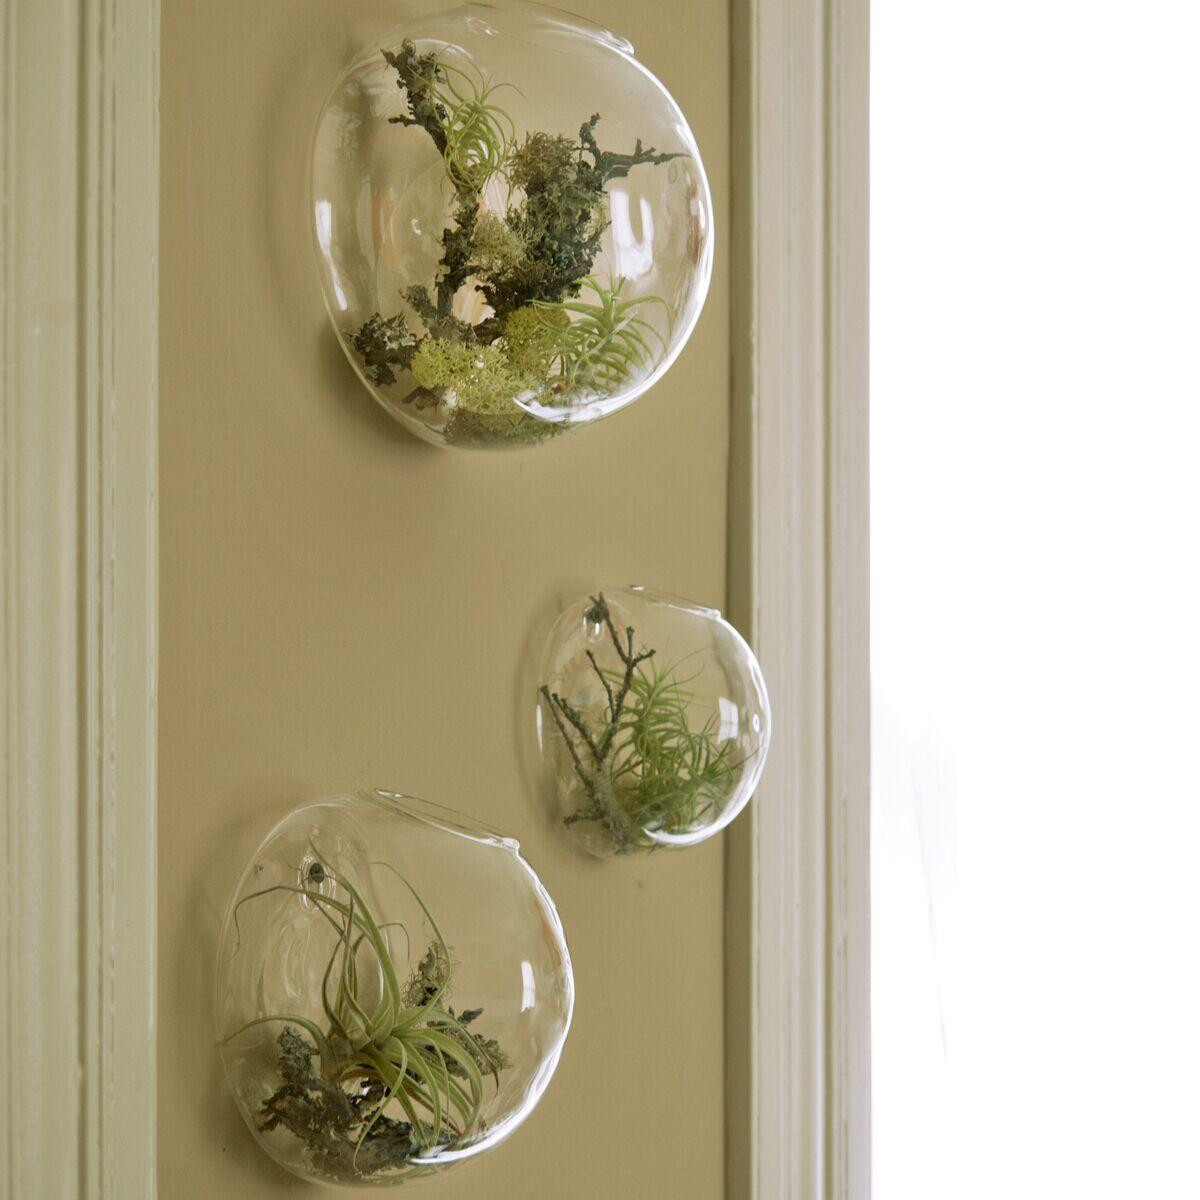 15 Elegant Clear Round Glass Vases wholesale 2022 free download clear round glass vases wholesale of wall bubble terrariums glass wall vase for flowers indoor plants within wall bubble terrariums glass wall vase for flowers indoor plants wall mounted pla